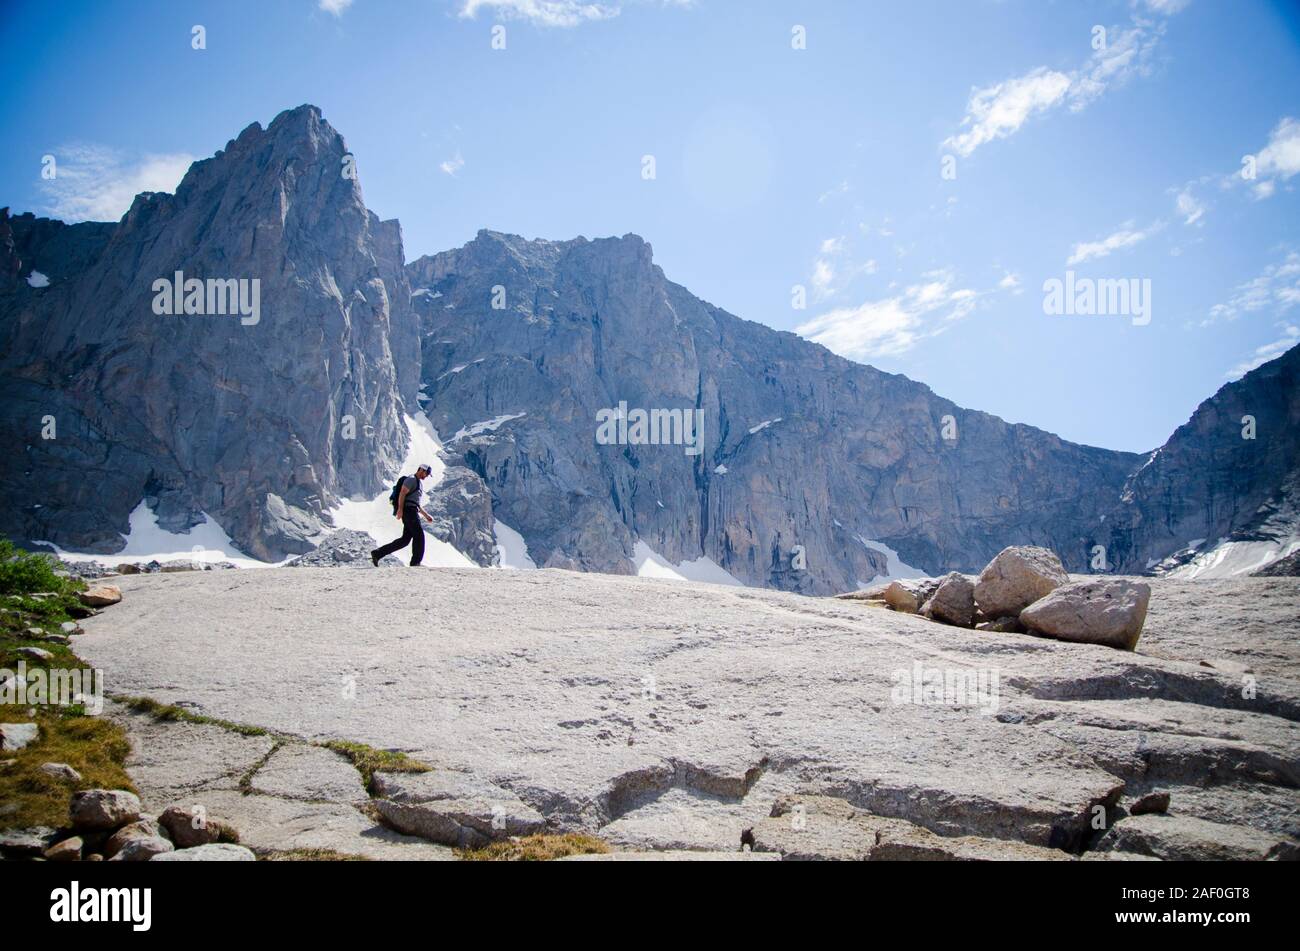 Man walking through the mountains with big cliffs behind Stock Photo